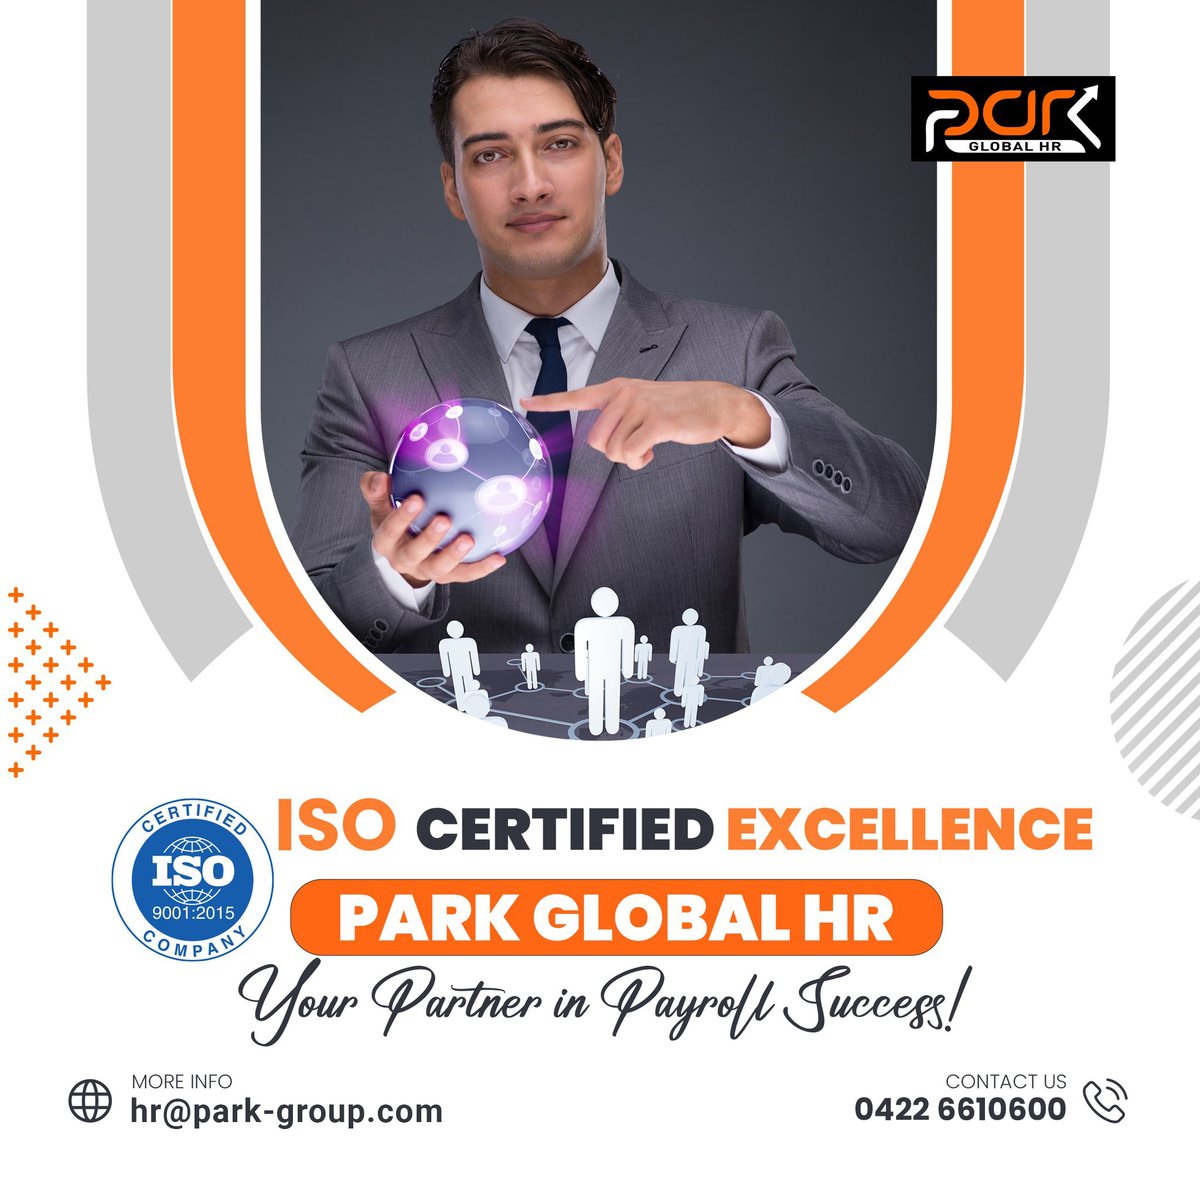 Unlock Payroll Excellence with Park Global HR! We're proud to announce our ISO Certification, a testament to our commitment to excellence. Partner with us for seamless payroll solutions and elevate your business success!

#ParkGlobalHR #PayrollExcellence #ISOcertified #HRPartner